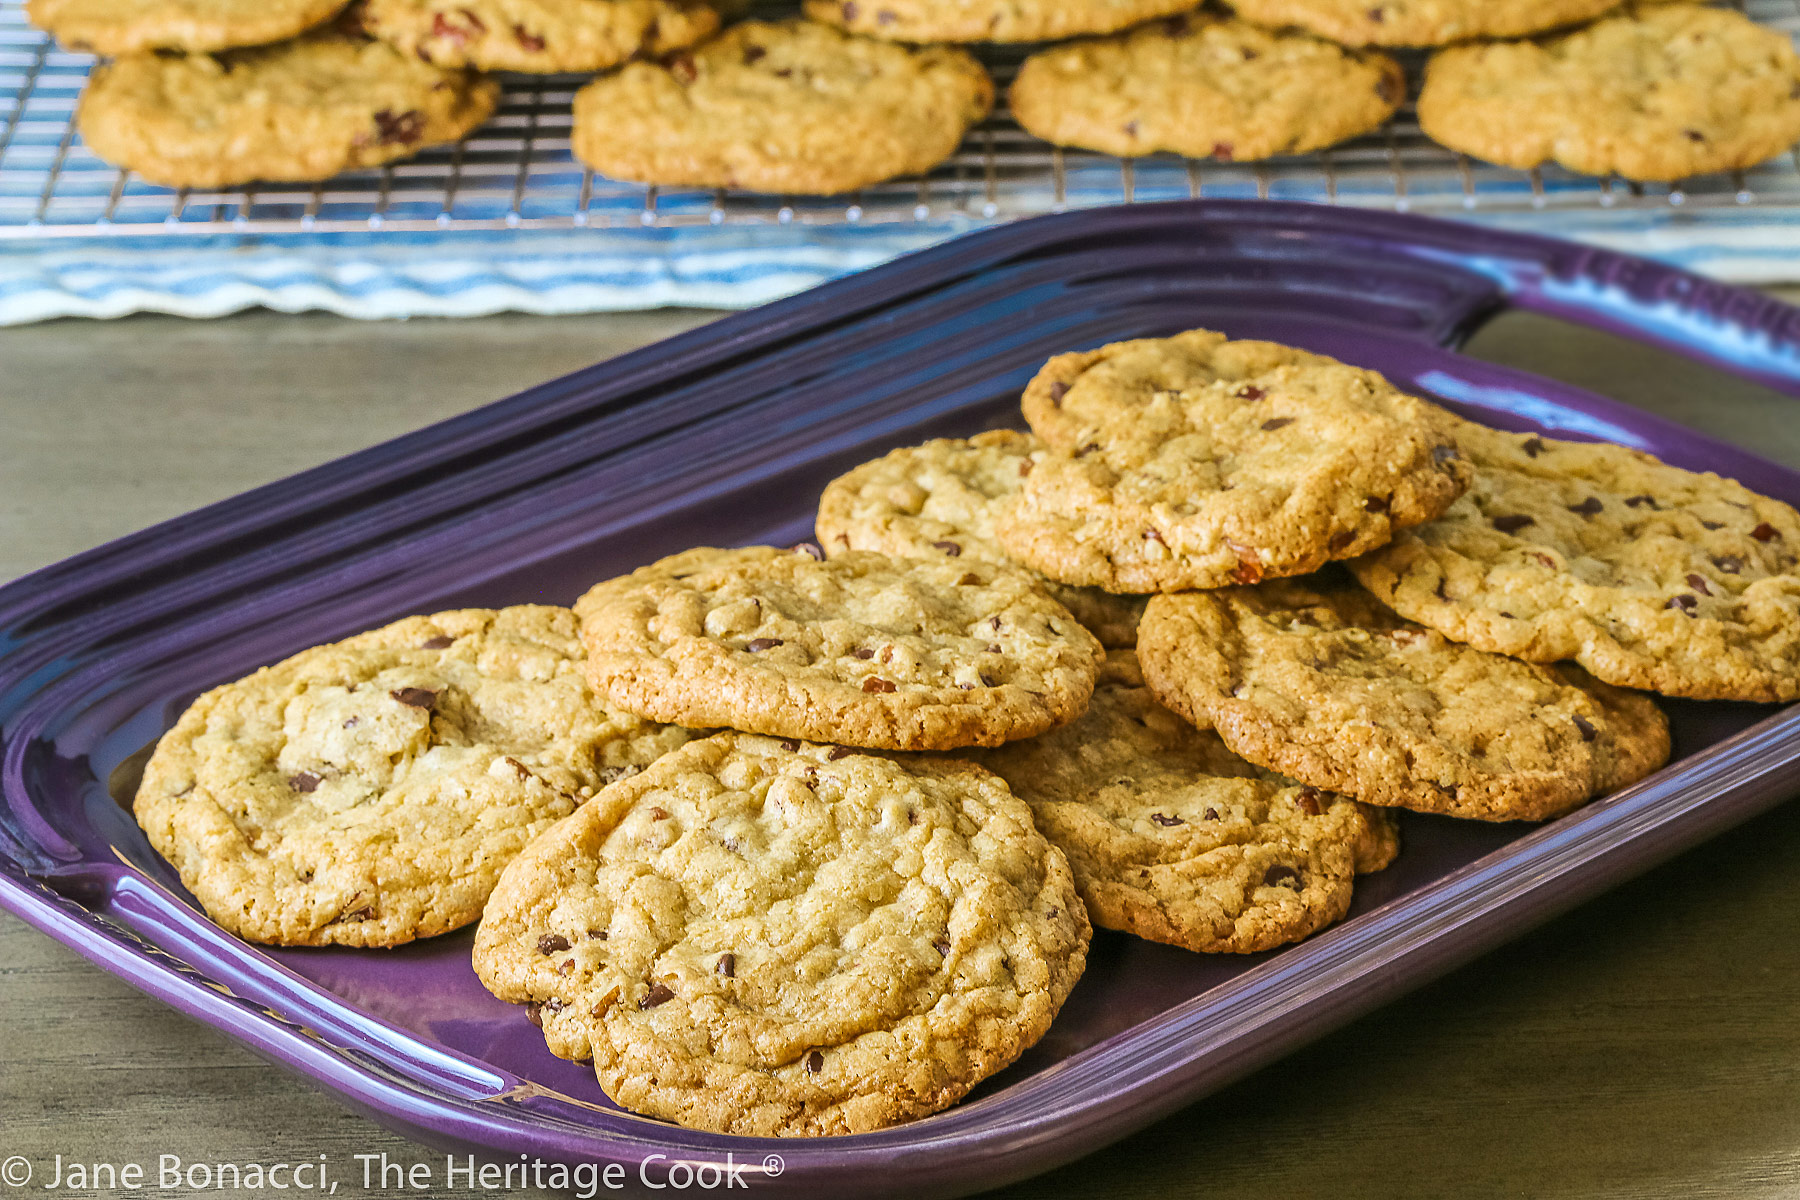 Golden brown cookies studded with chocolate, caramel, and pecans piled on a wire rack and purple platter; Turtle Chocolate Chip Cookies © 2023 Jane Bonacci, The Heritage Cook. 